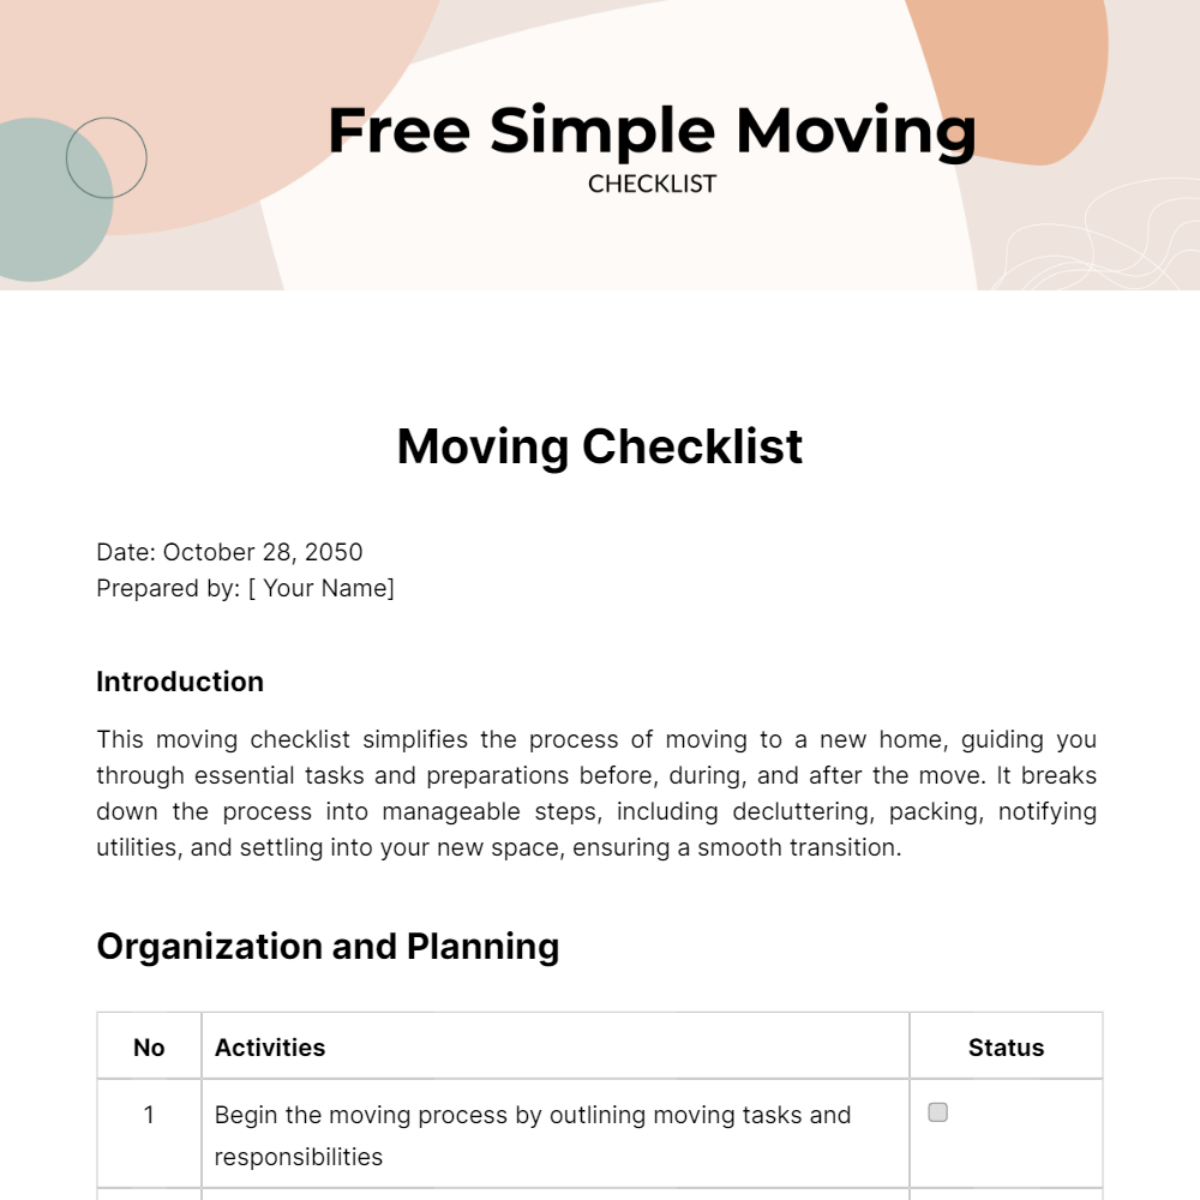 Free Simple Moving Checklist Template